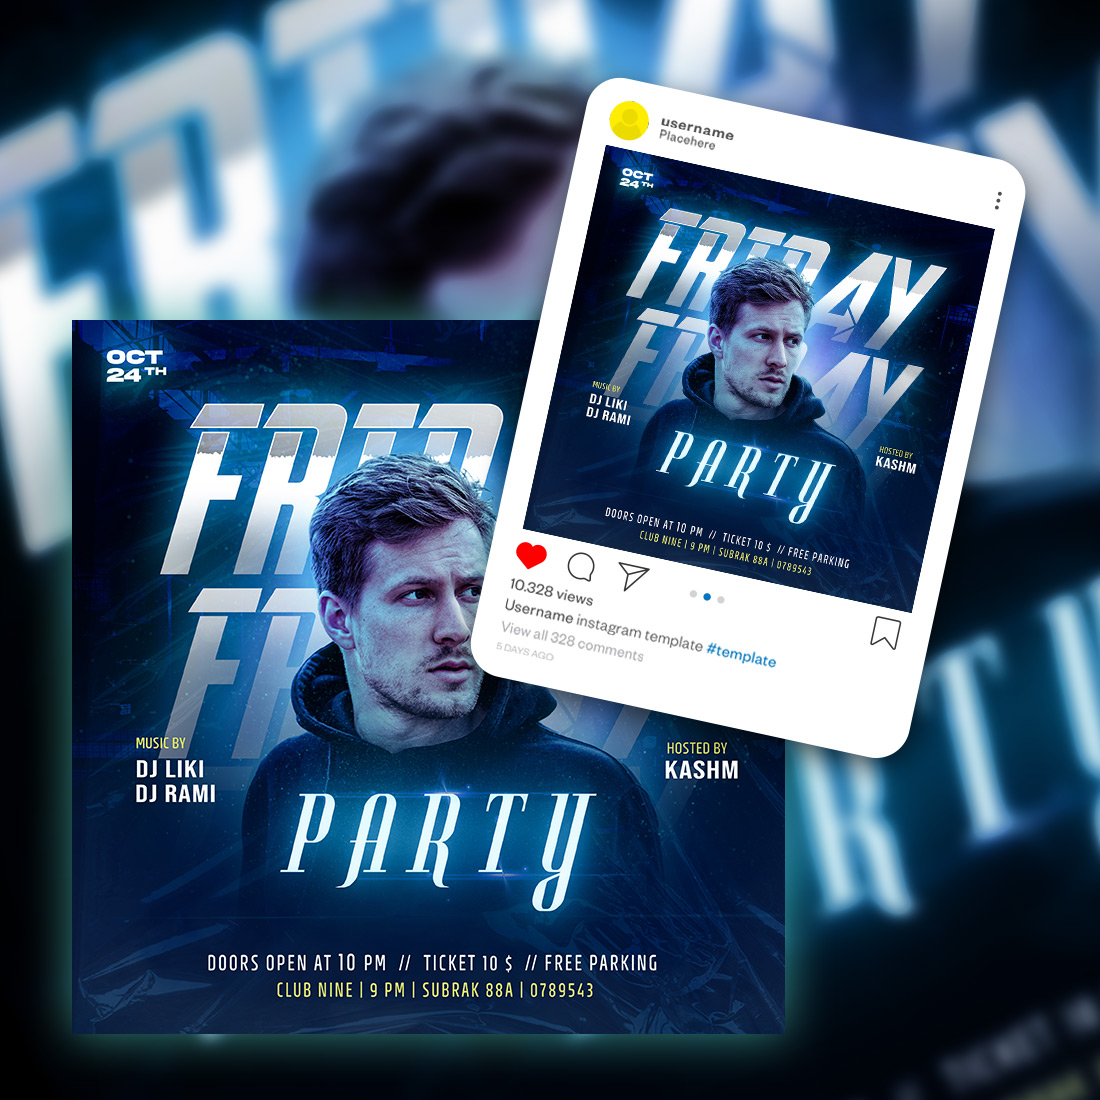 Friday Party Flyer dj party club party social media post and flyer template PSD preview image.